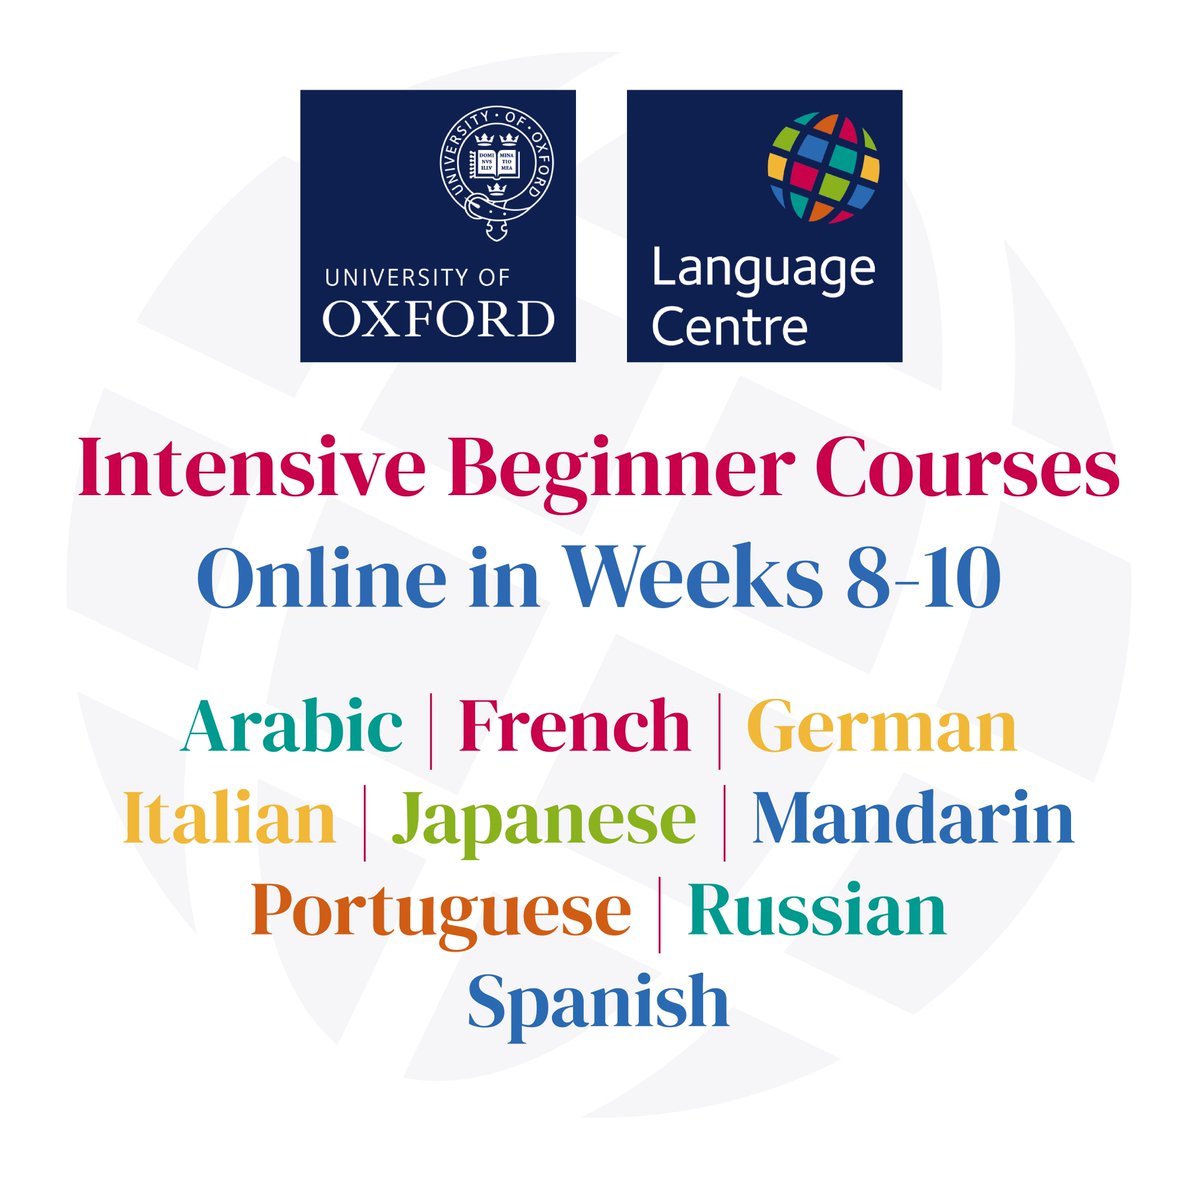 Sign up by noon on Thursday to learn a new language with us from scratch, entirely online (4-21 March). Our Intensive beginner courses consist of two 90-minute online evening classes per week, with online learning activities completed in your own time. lang.ox.ac.uk/modern-languag…